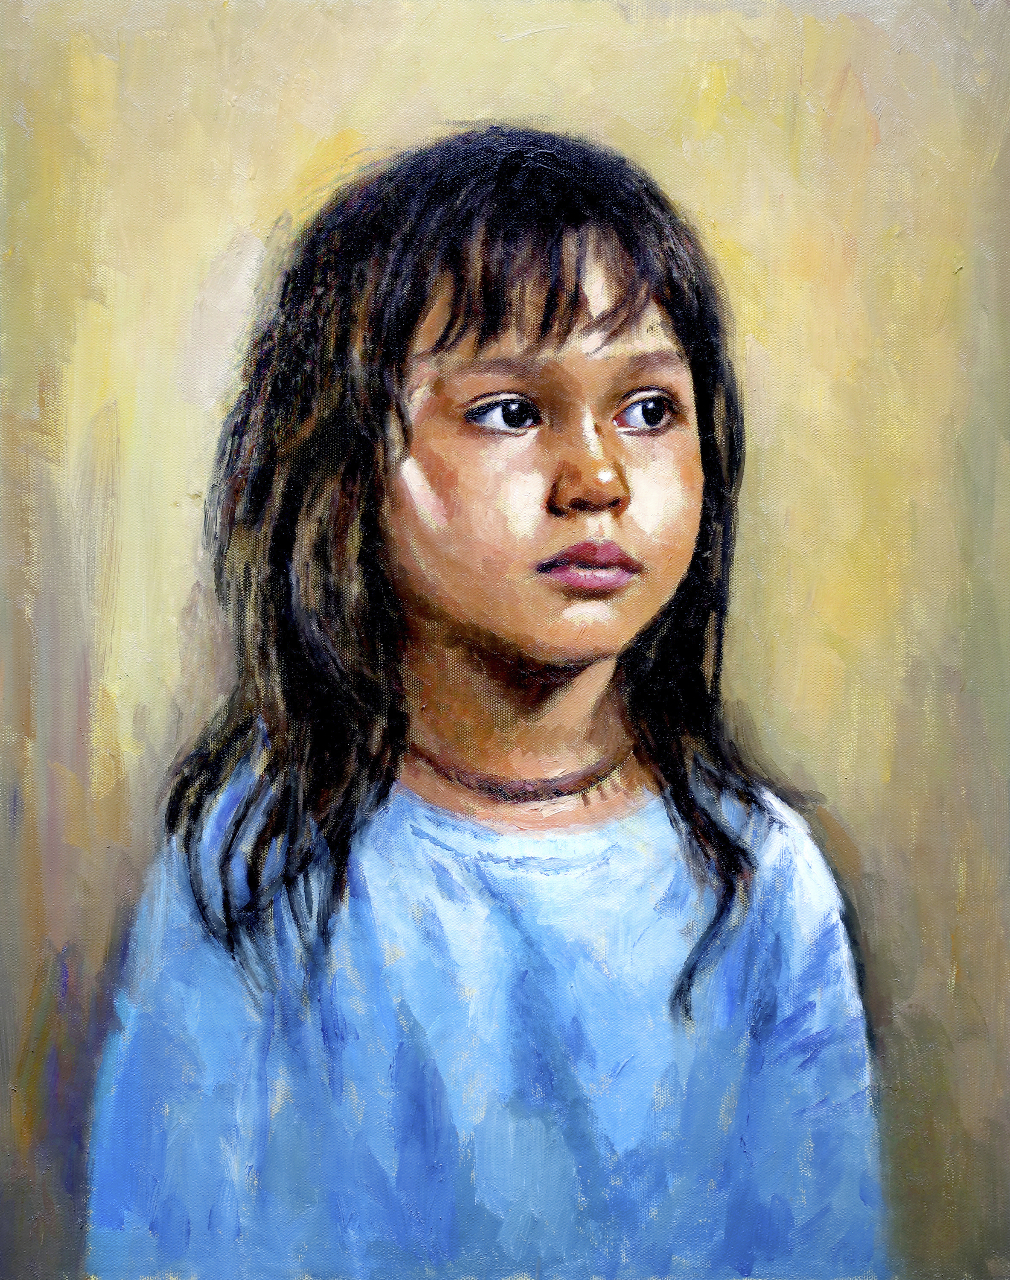 &ldquo;Portrait Painting in Oils of Emilie #1 by Dad&rdquo;